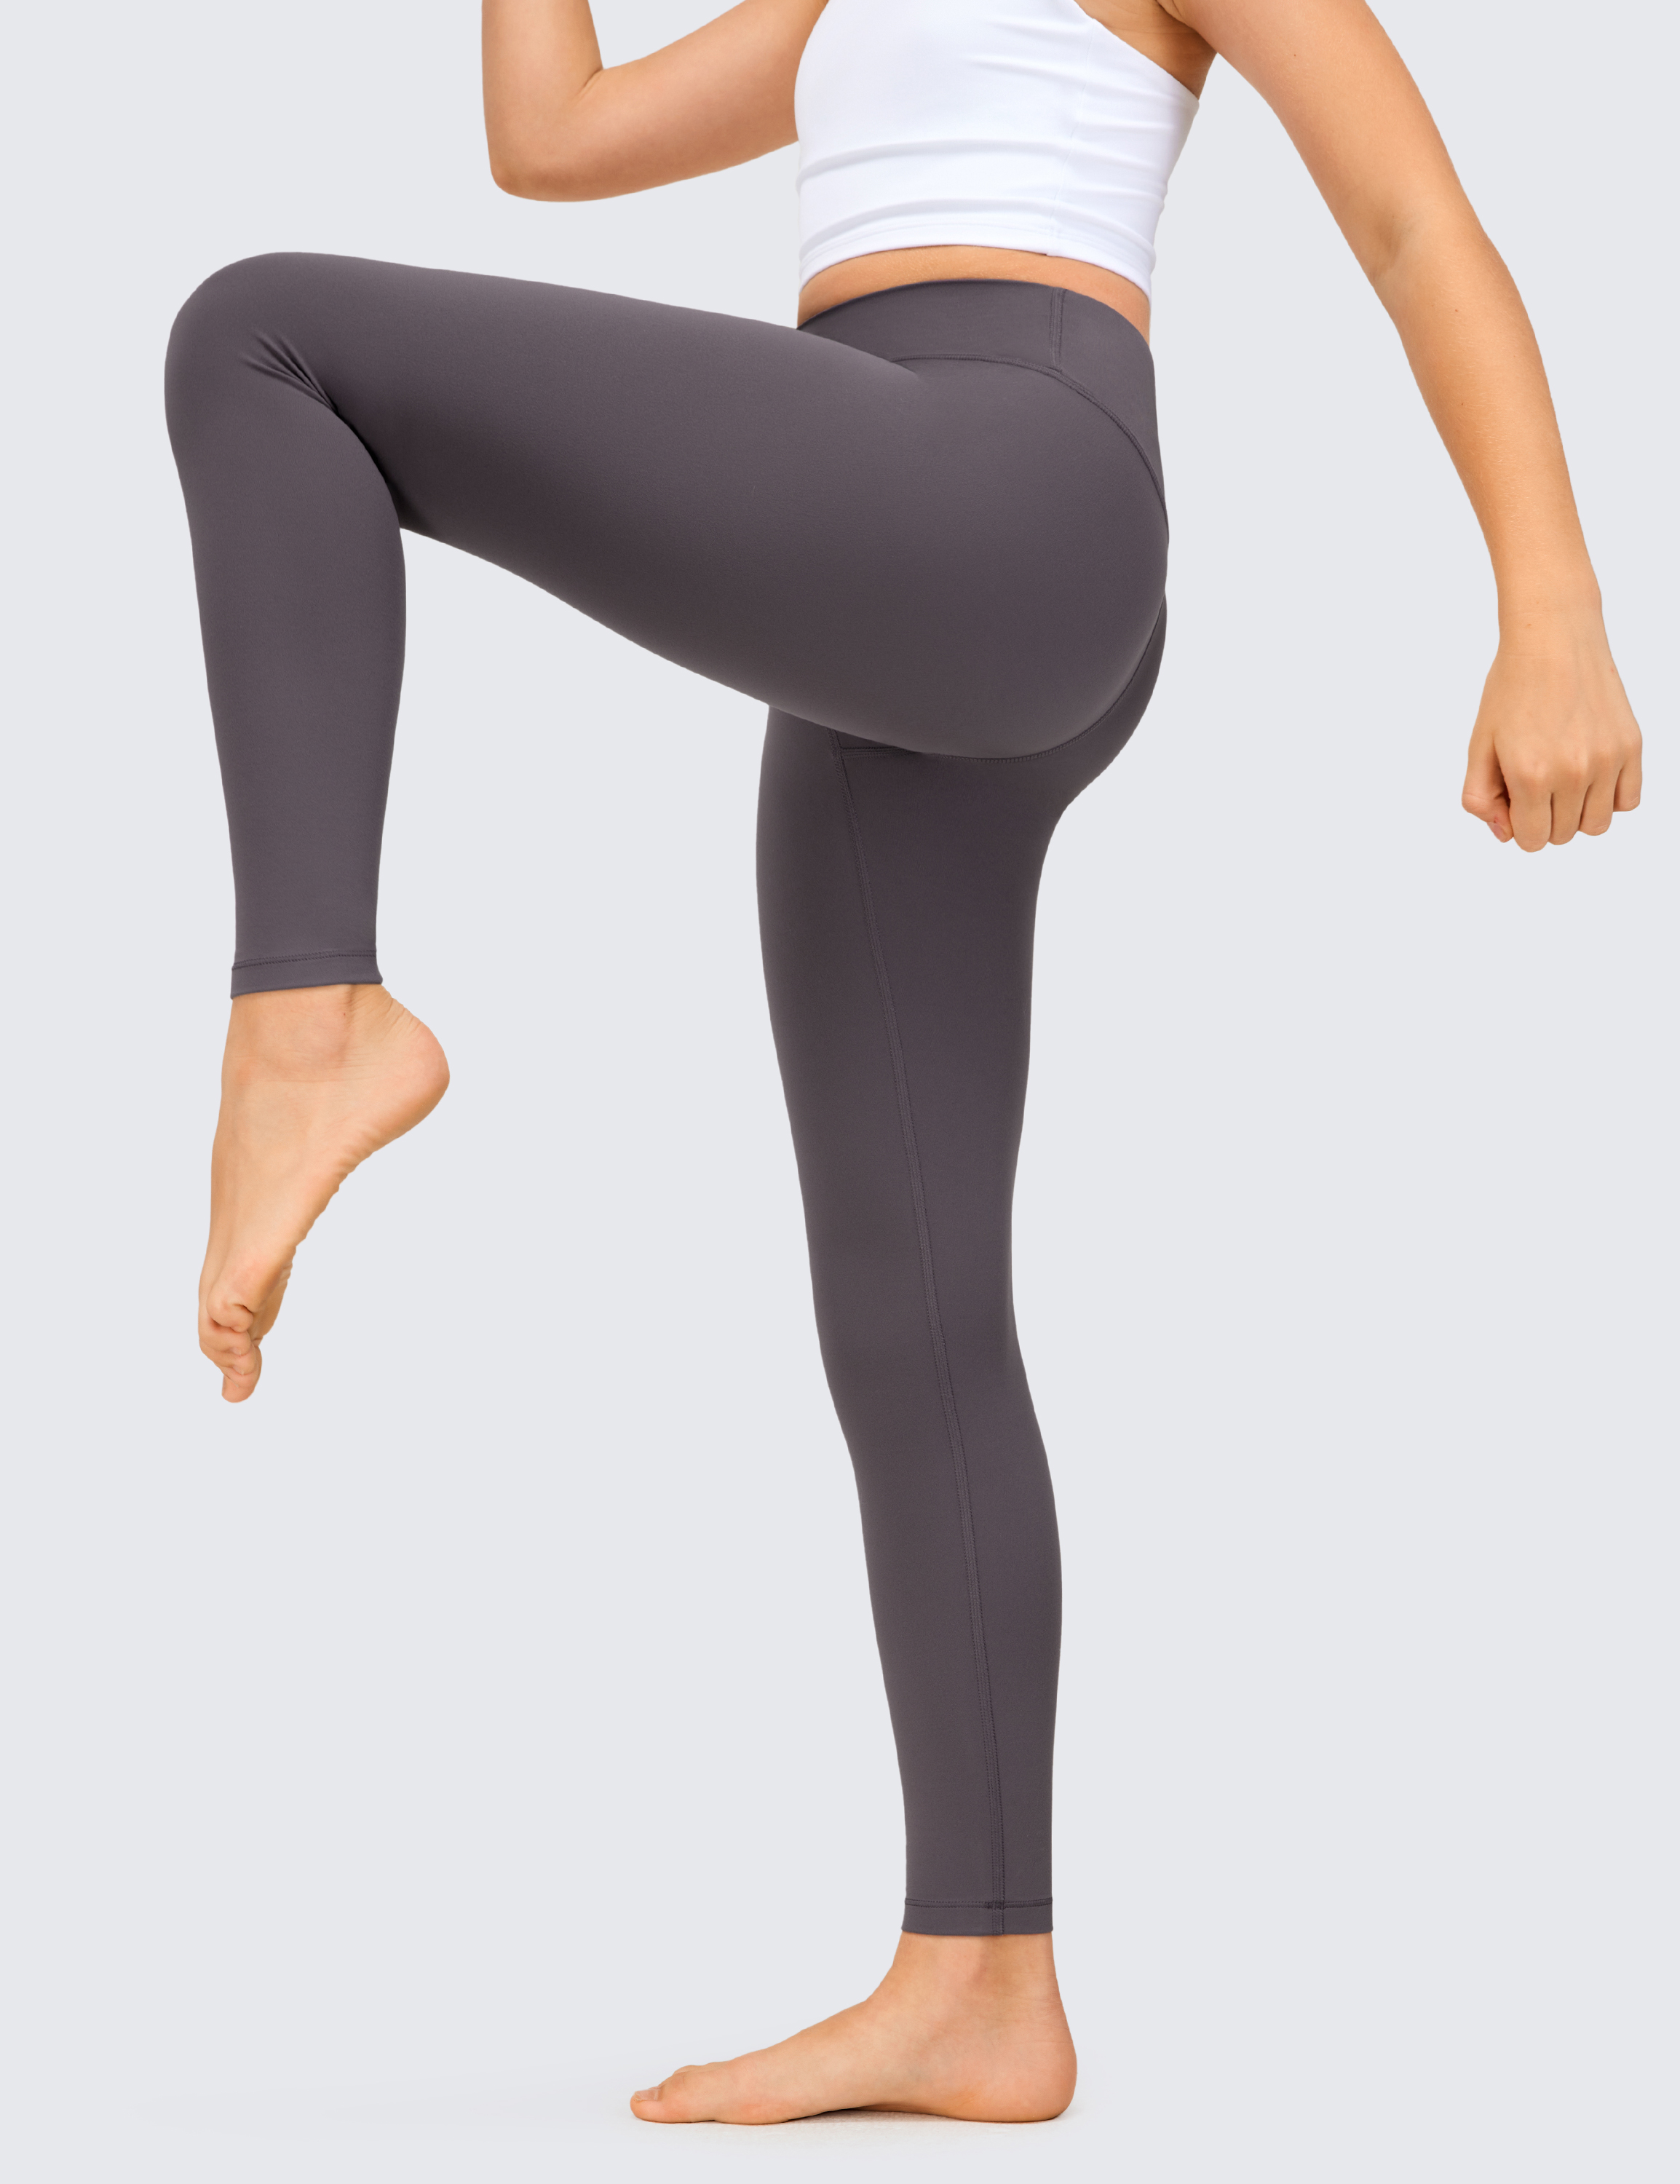  CRZ YOGA Girls Butterluxe Full Length Athletic Leggings - Kids  High Waist Lounge Pants Girls Active Dance Running Yoga Tights Black  X-Small: Clothing, Shoes & Jewelry